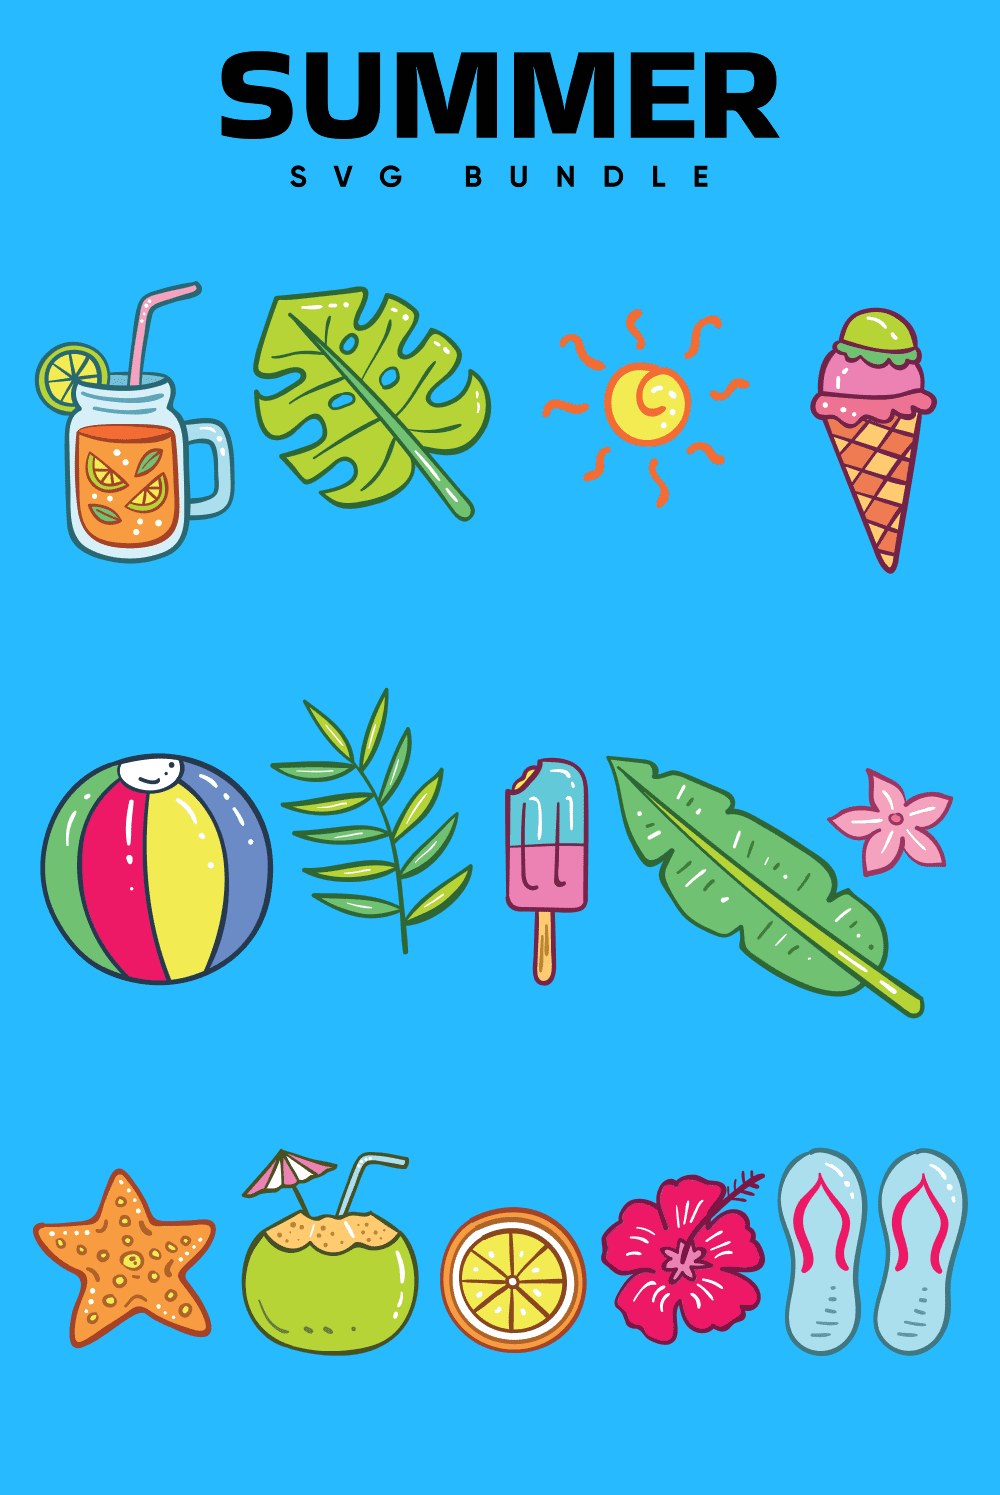 Cocktails with citrus fruits, tropical plants, starfish - summer SVG.